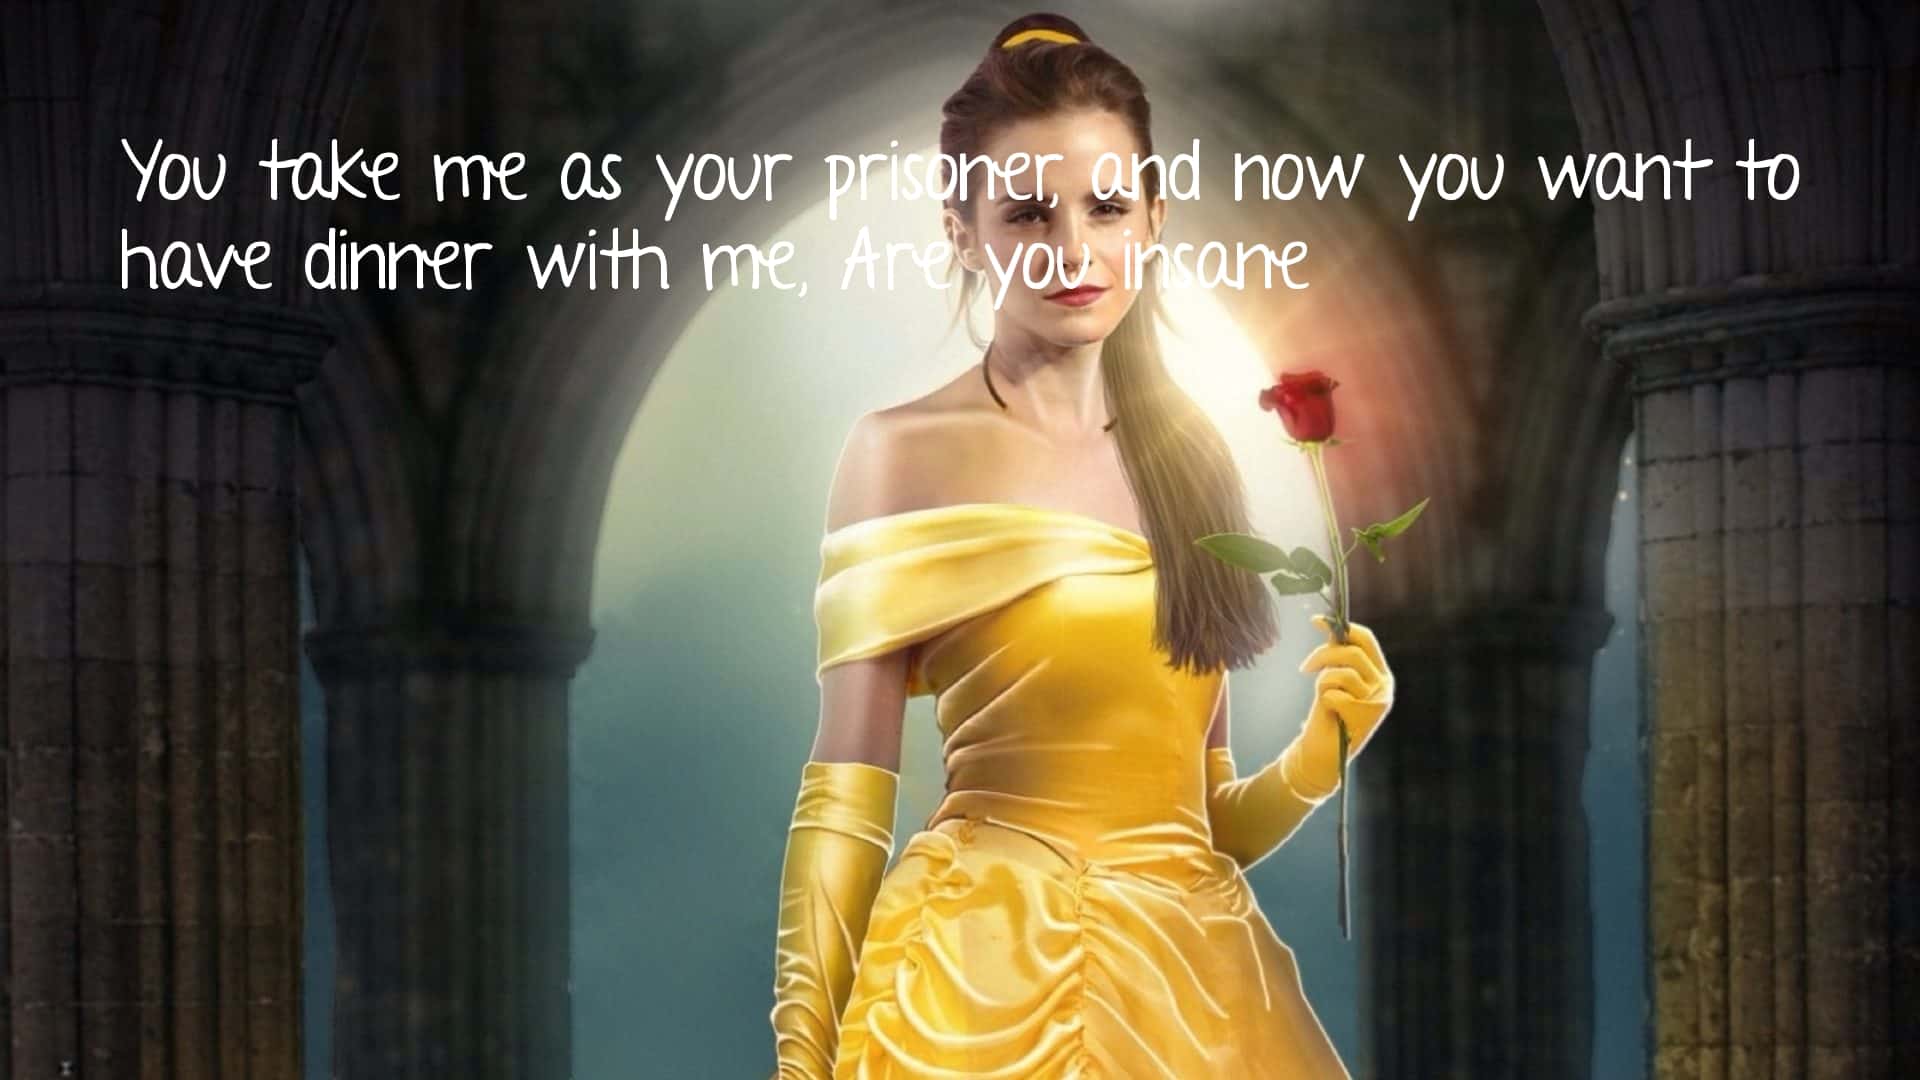 Beauty And The Beast Quotes